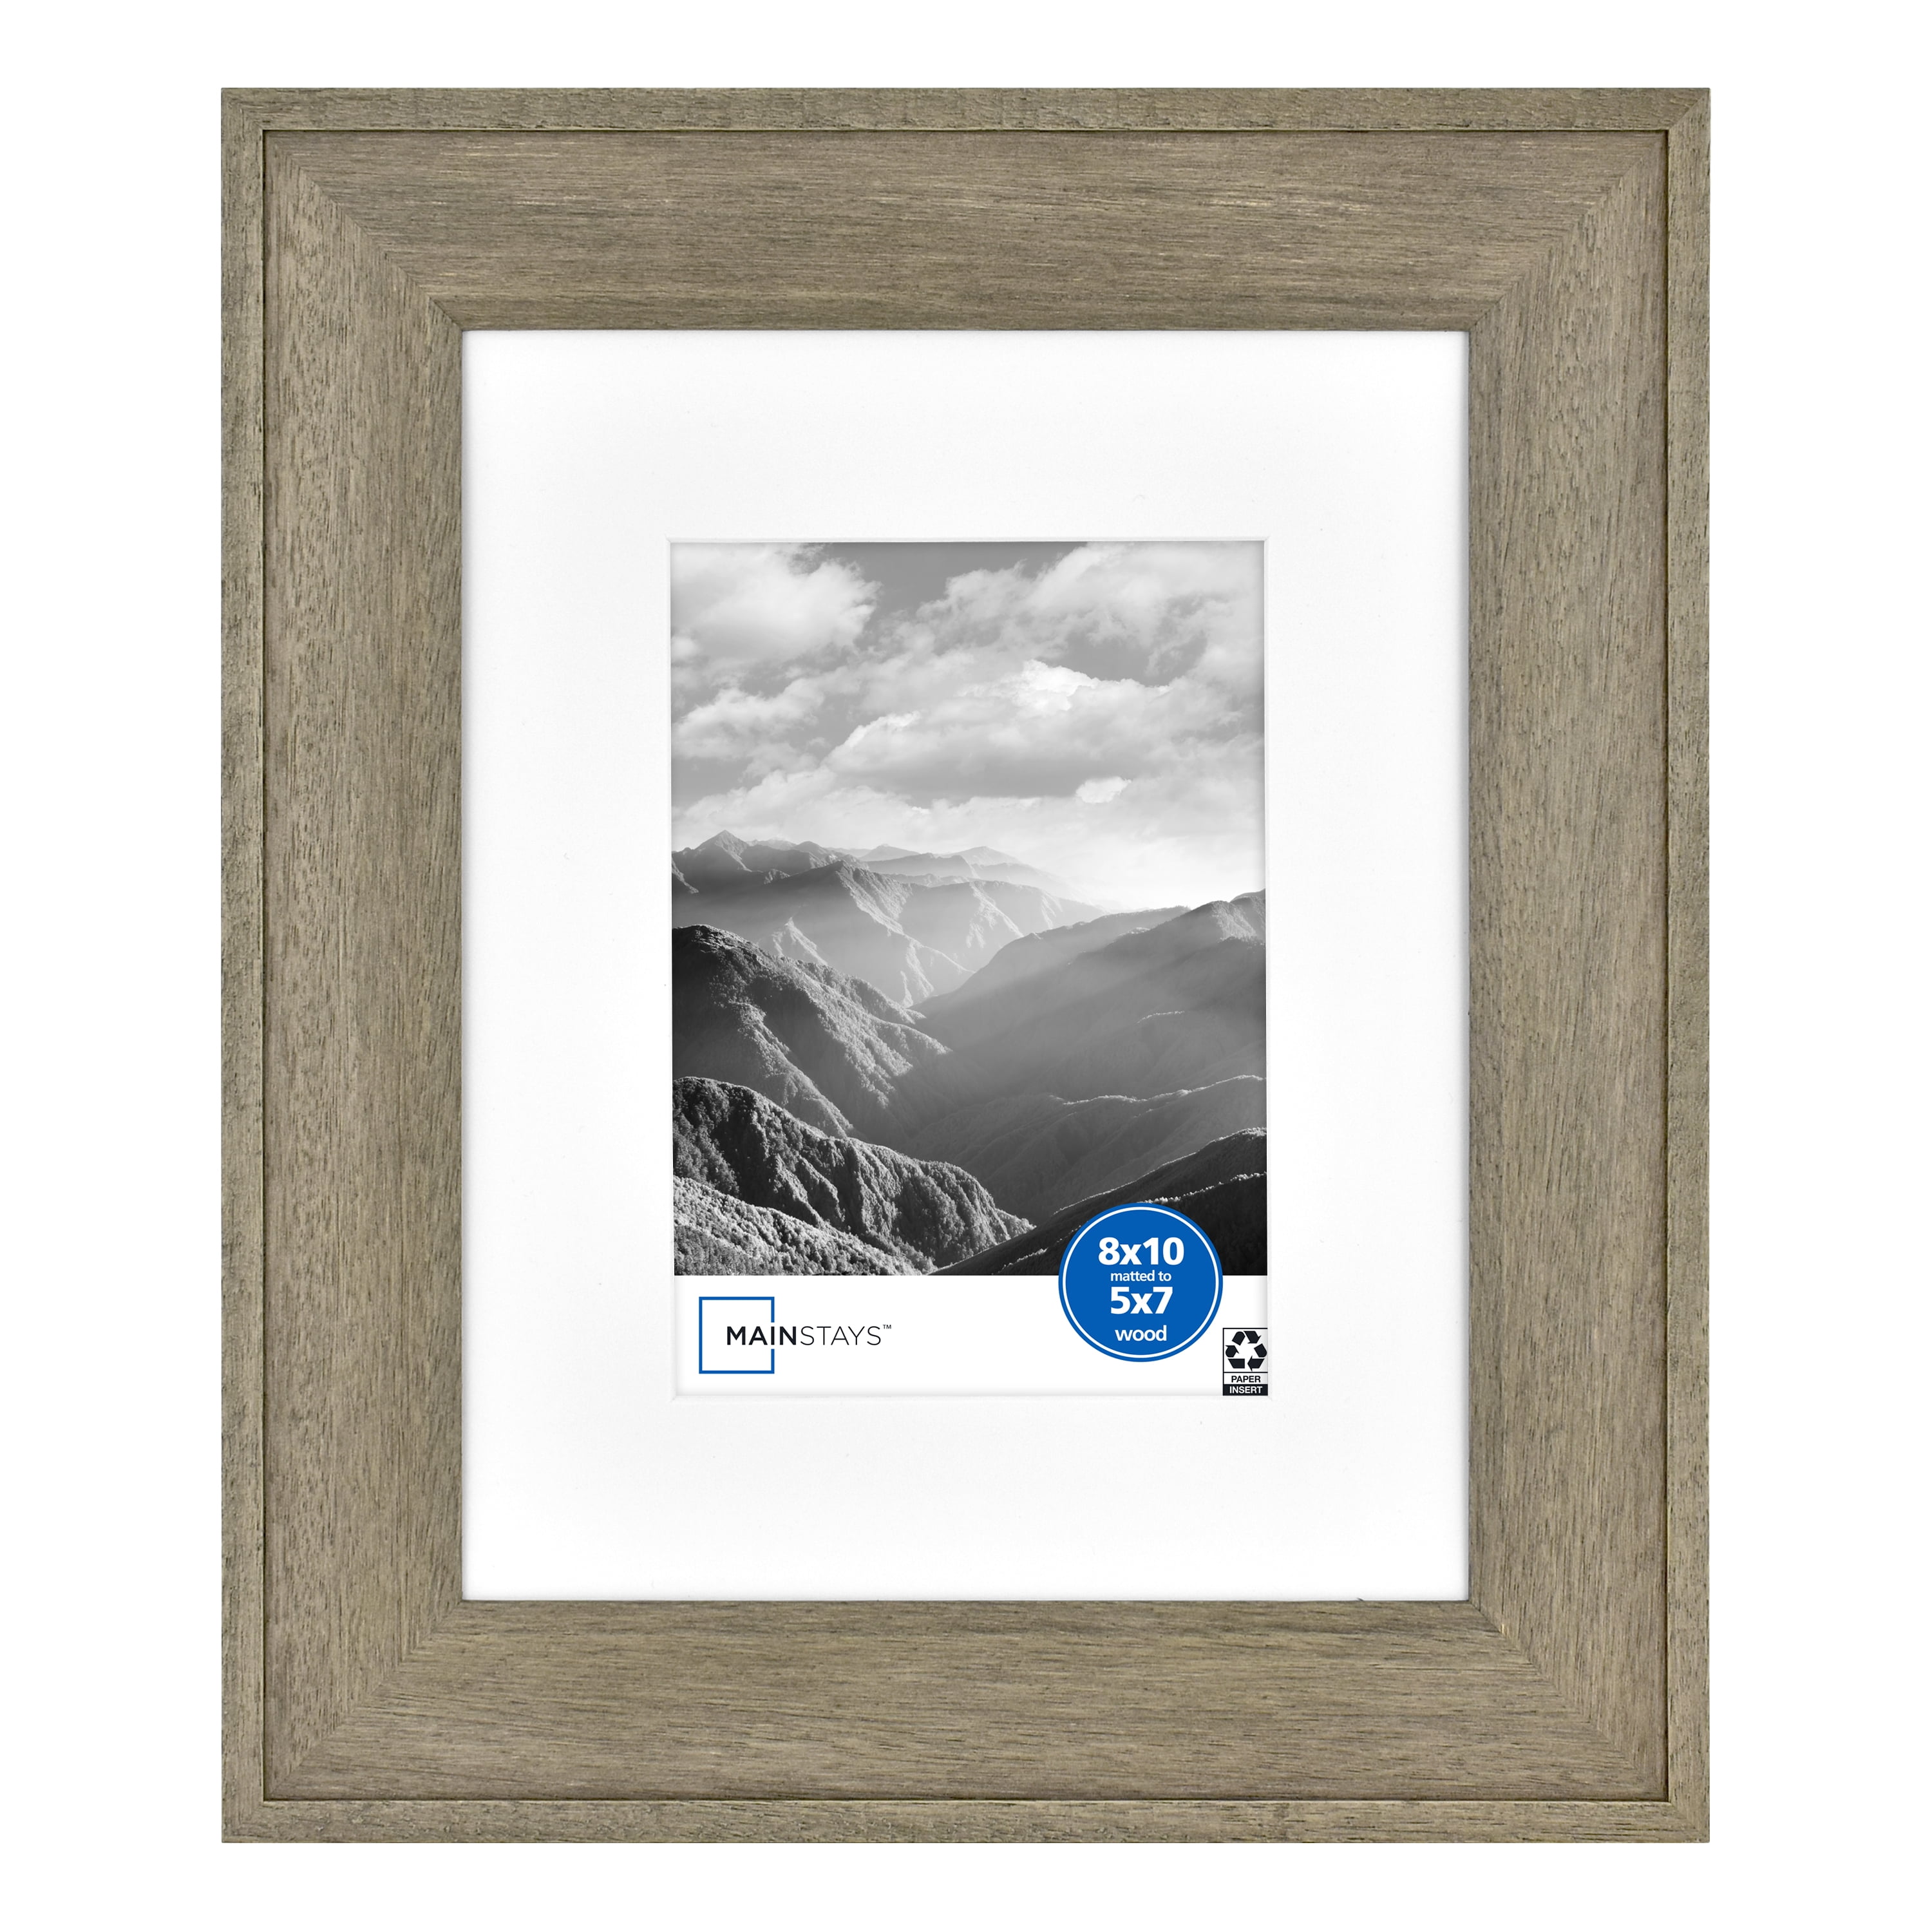 Mainstays 8"x10" matted to 5"x7" Rustic Wood Tabletop Picture Frame